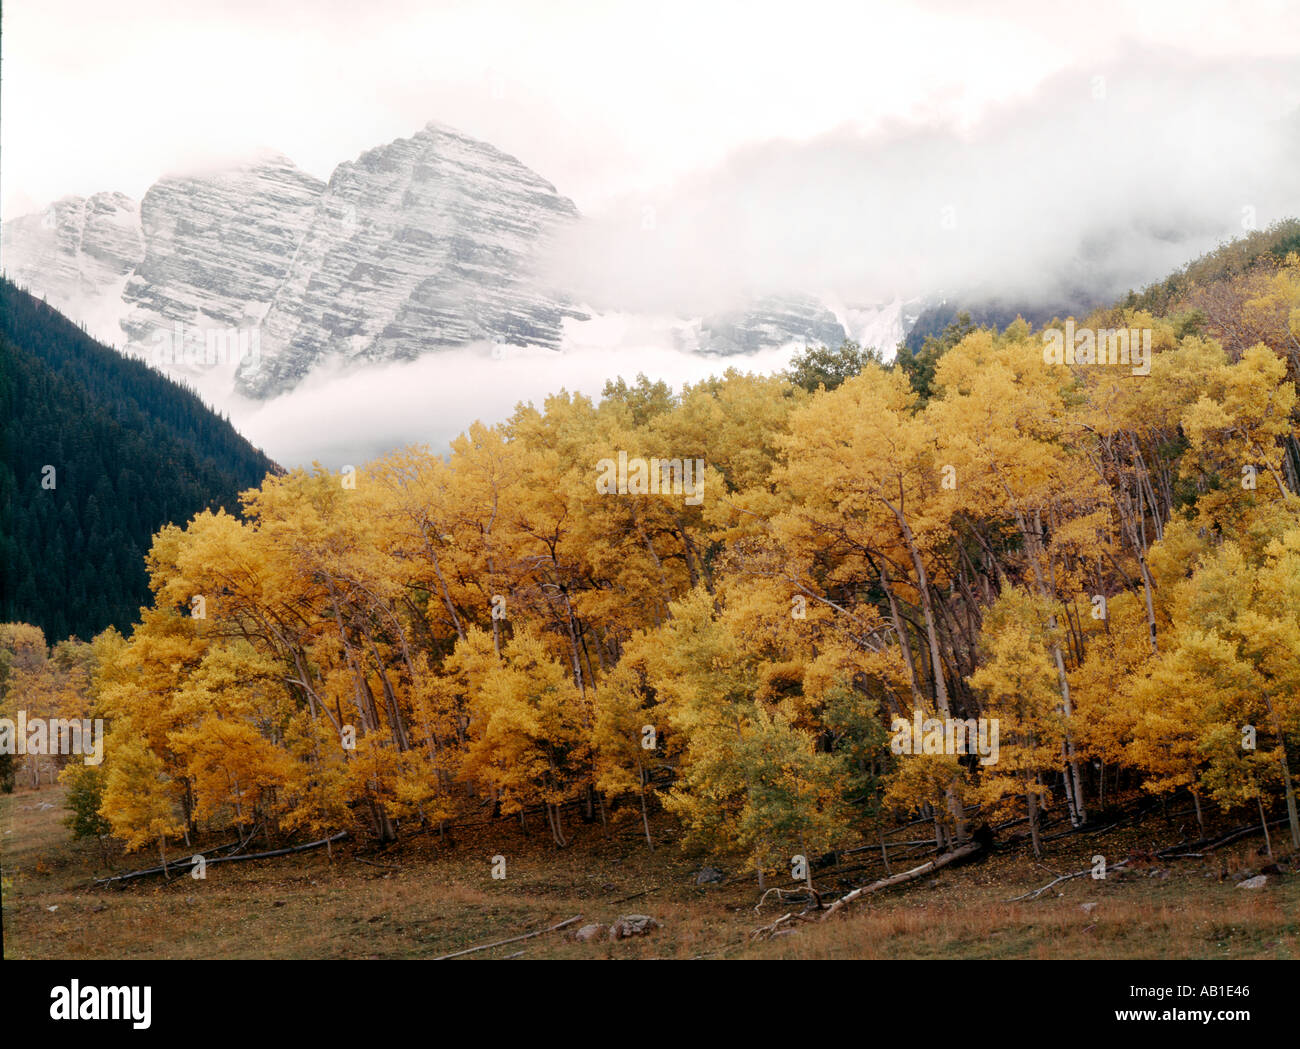 Autumn colors at the Maroon Bells Mountains 14000 foot high peaks in Colorado s White River National Forest Stock Photo